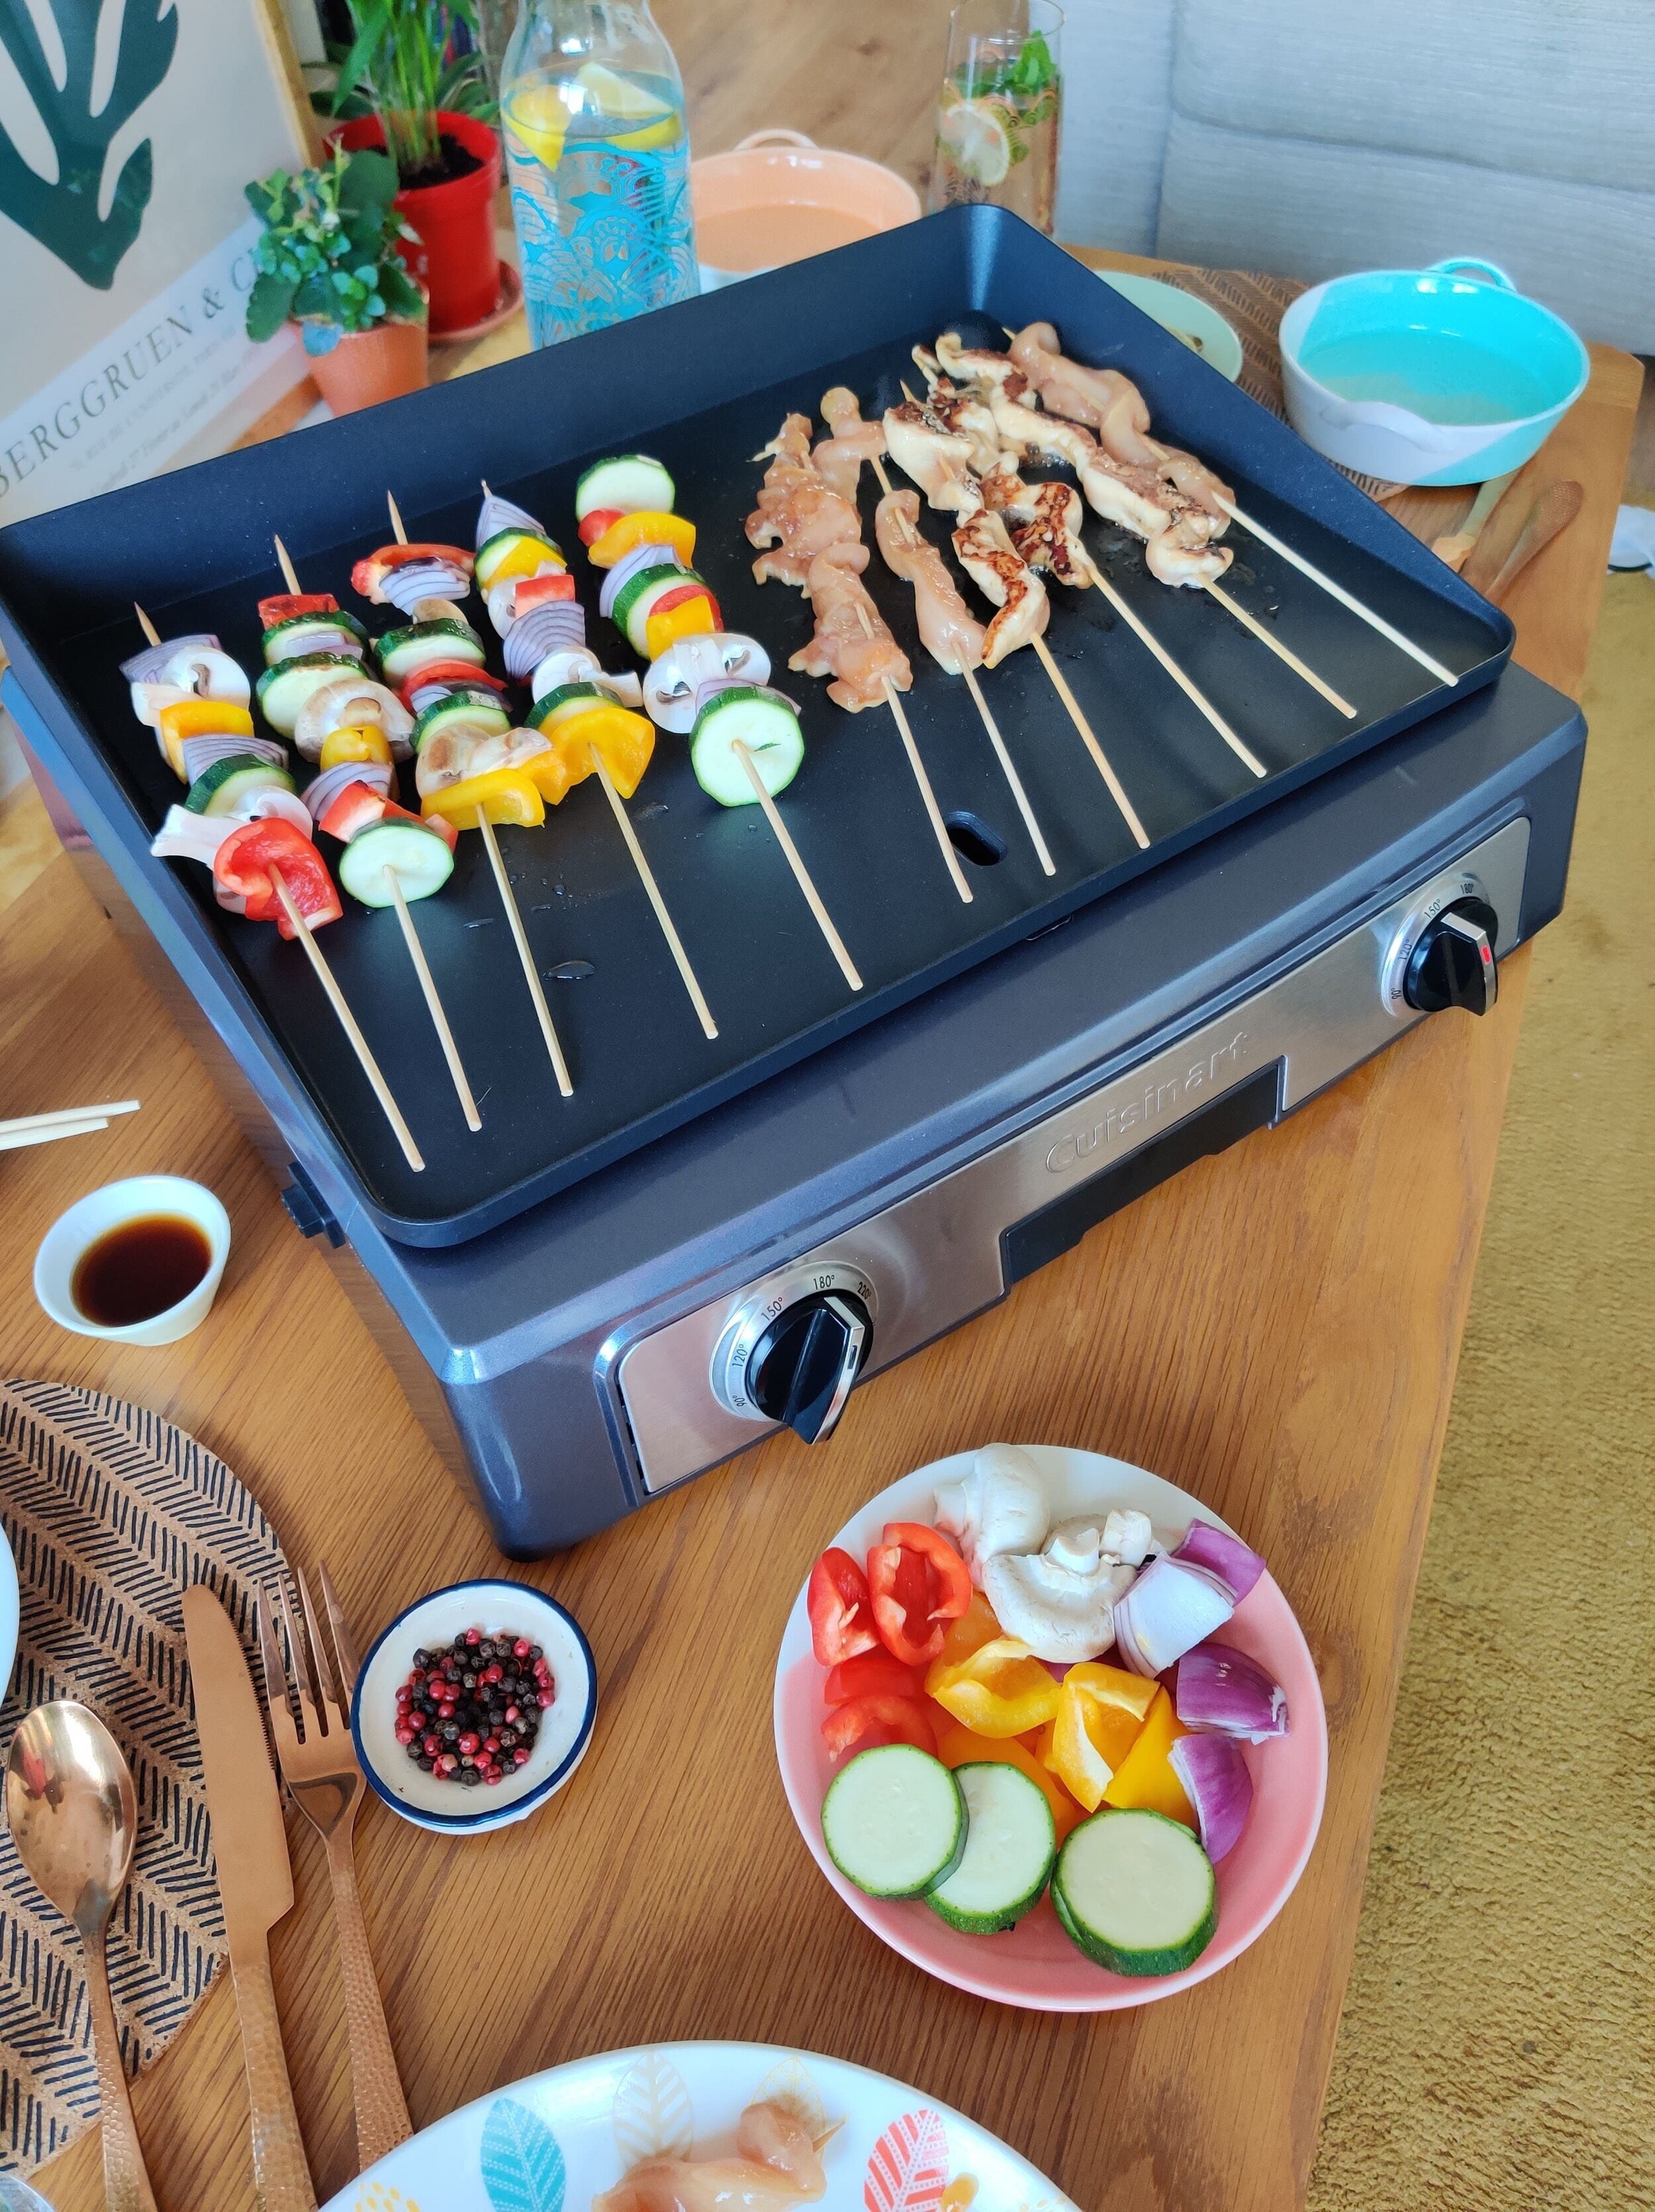 Cuisinart entertaining grill review